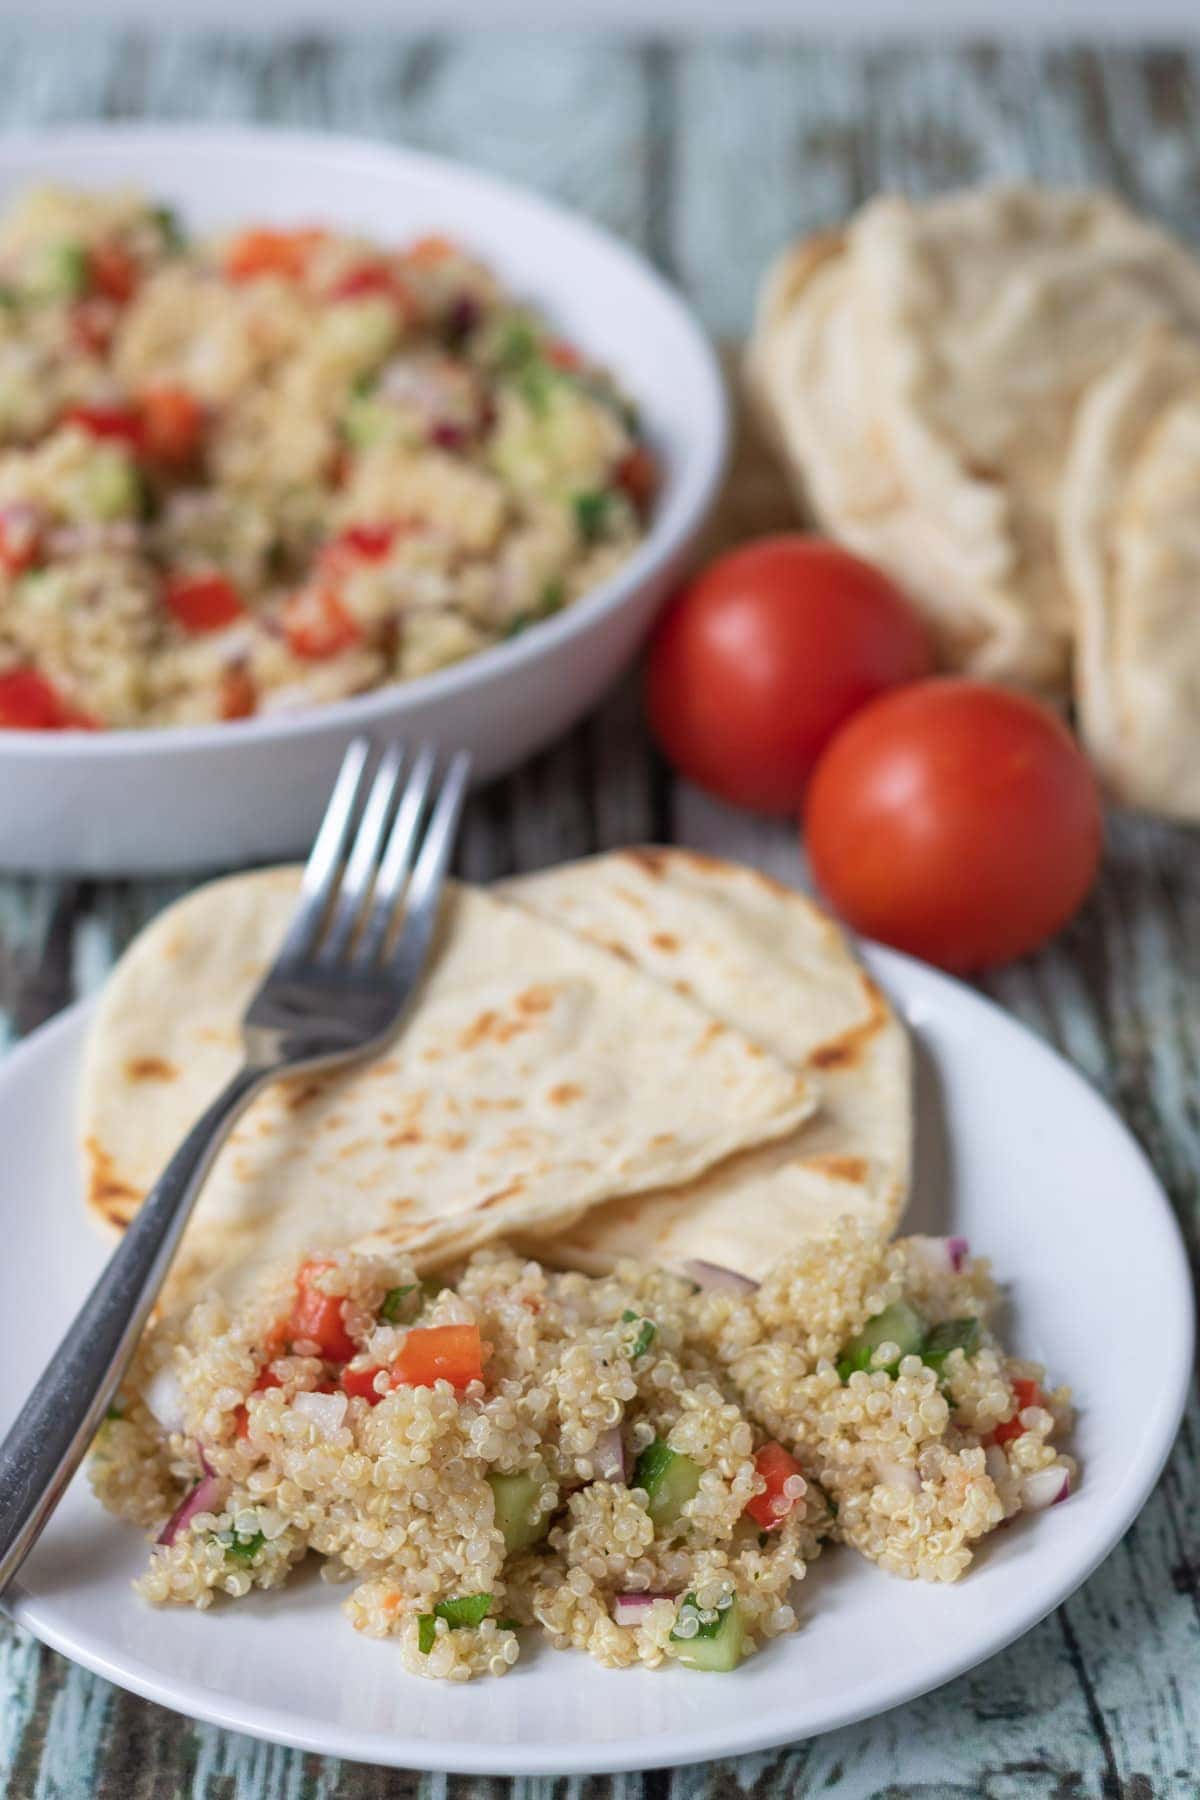 A plate with a serving of quick quinoa salad and flatbreads on as accompaniment. The rest of the salad in a bowl in the background with two tomatoes and flatbreads beside.